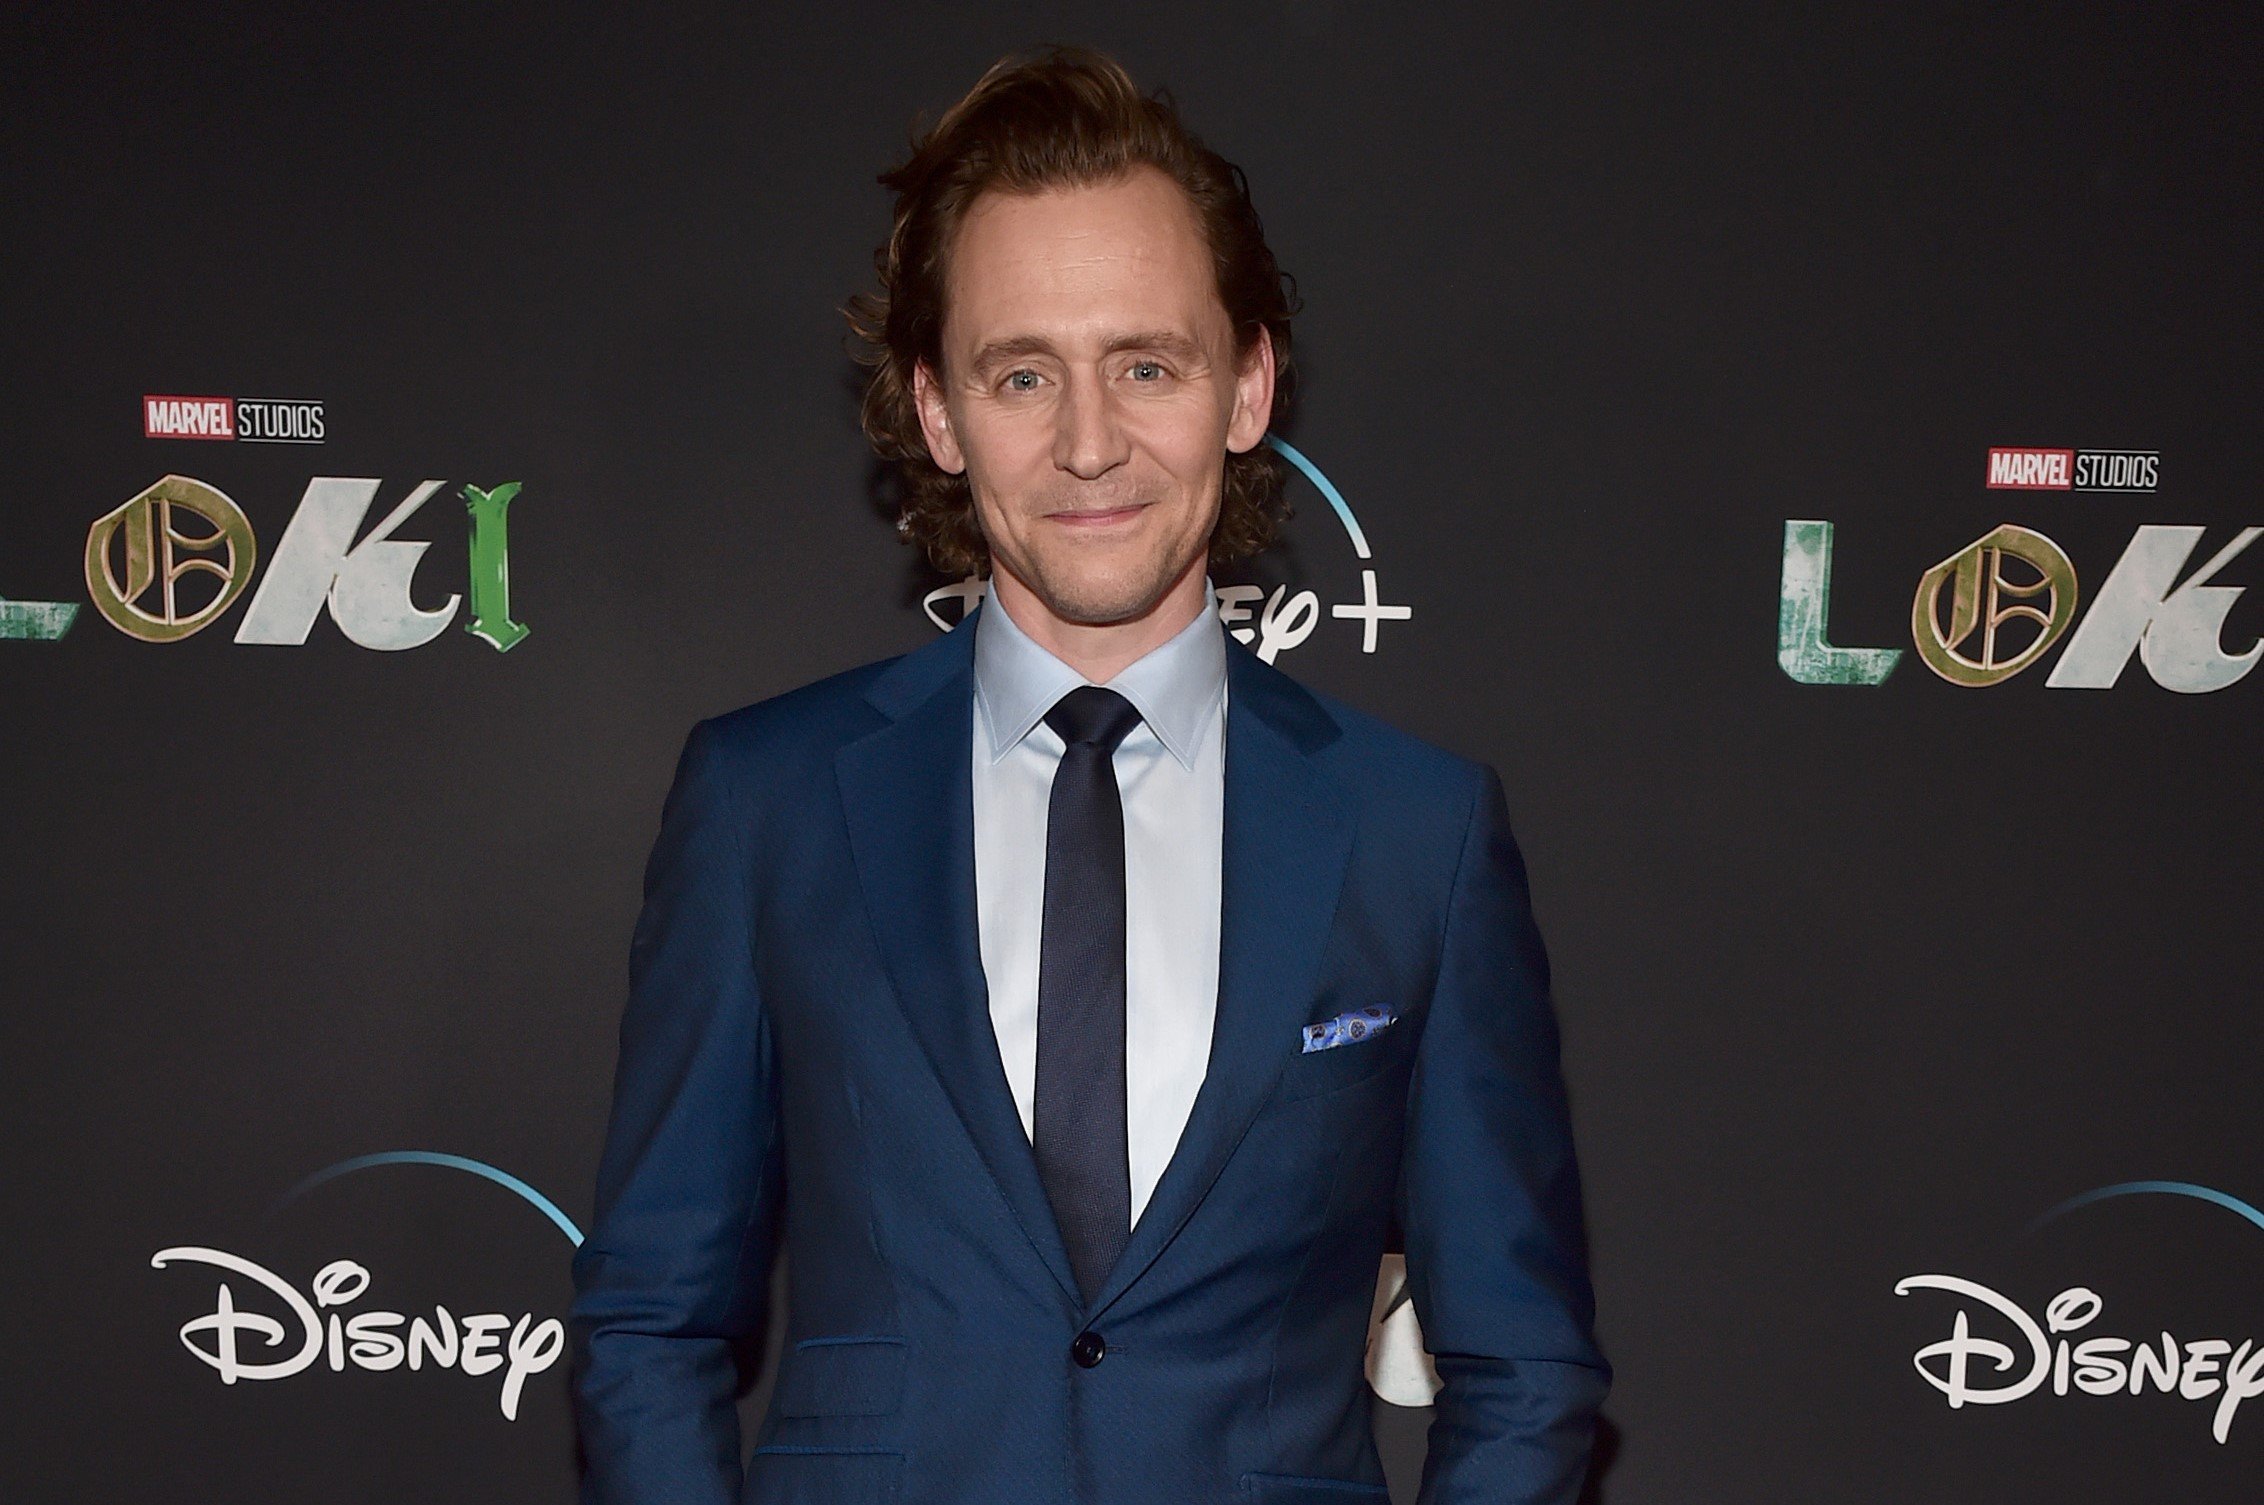 Tom Hiddleston, who played Loki in the 'Thor' movies, wears a dark blue suit over a light blue button-up shirt and dark blue tie.